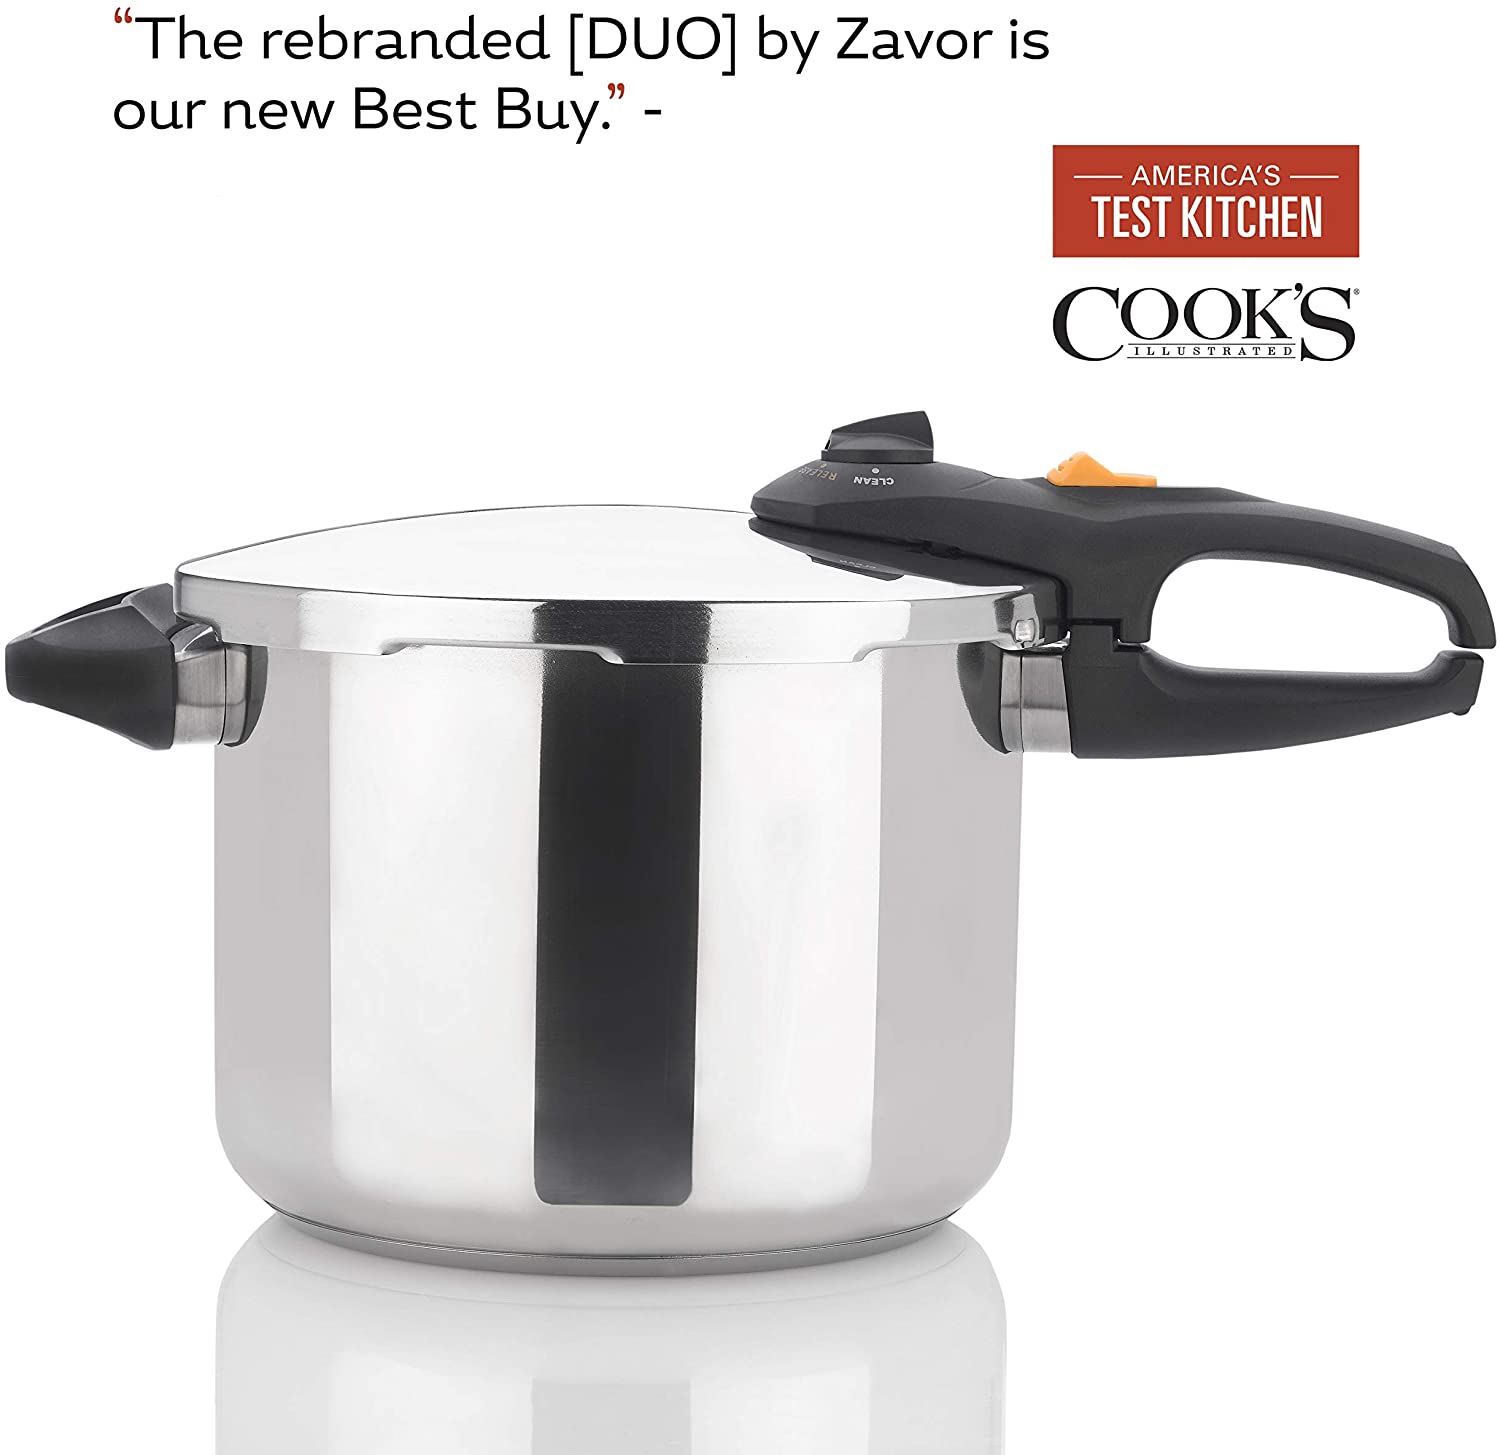 Slow Cooker Accessories: The Products We Use